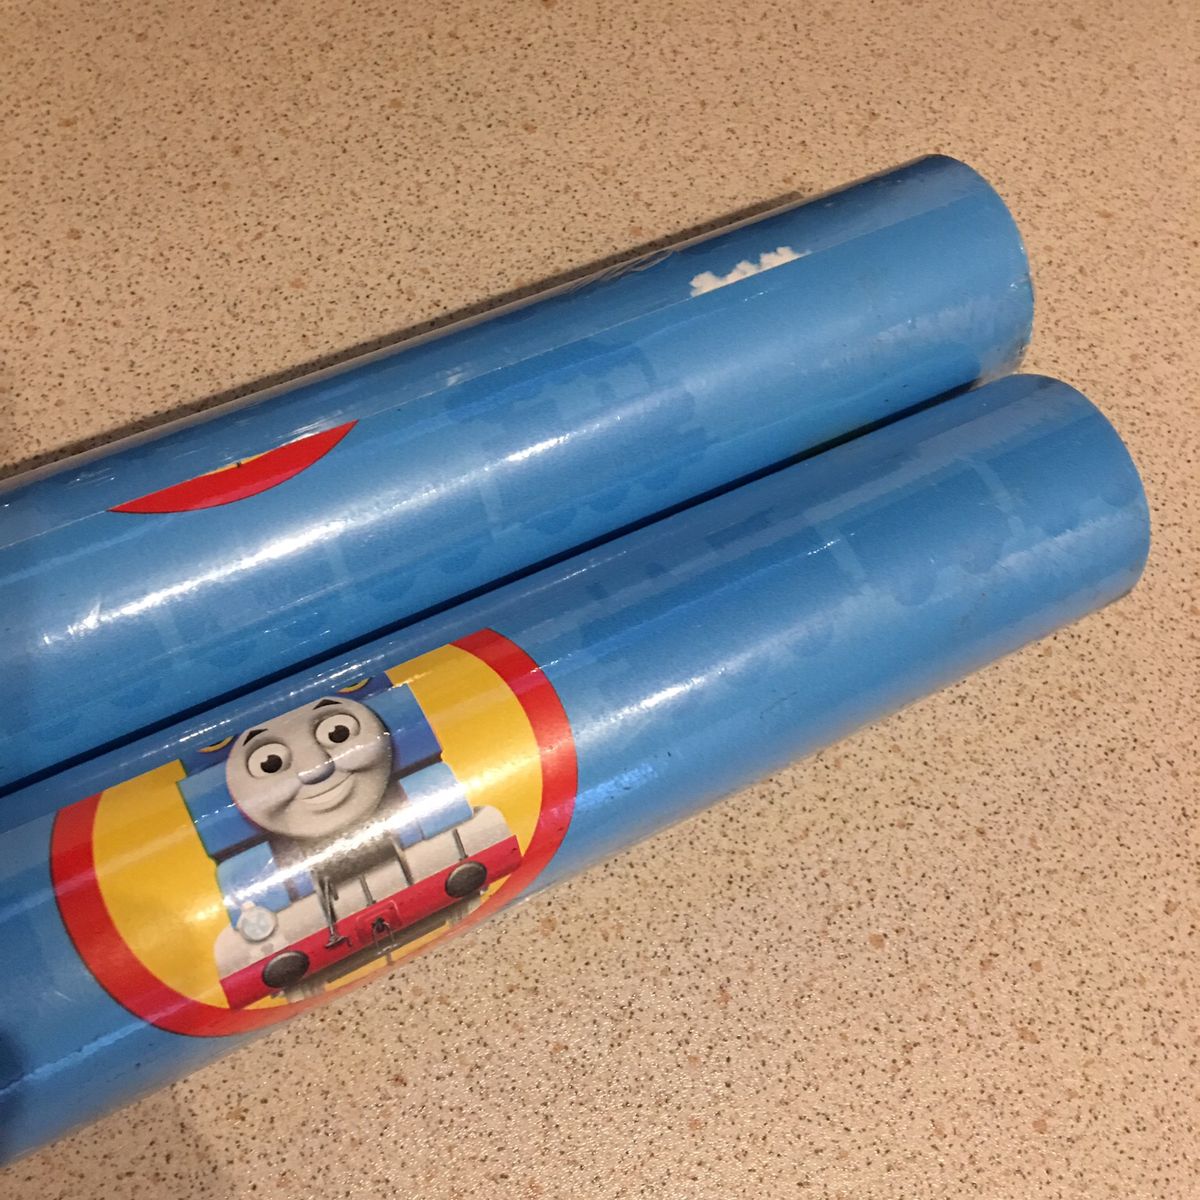 2 Brand New & Sealed Rolls Of Wallpaper - Thomas The Tank Engine , HD Wallpaper & Backgrounds